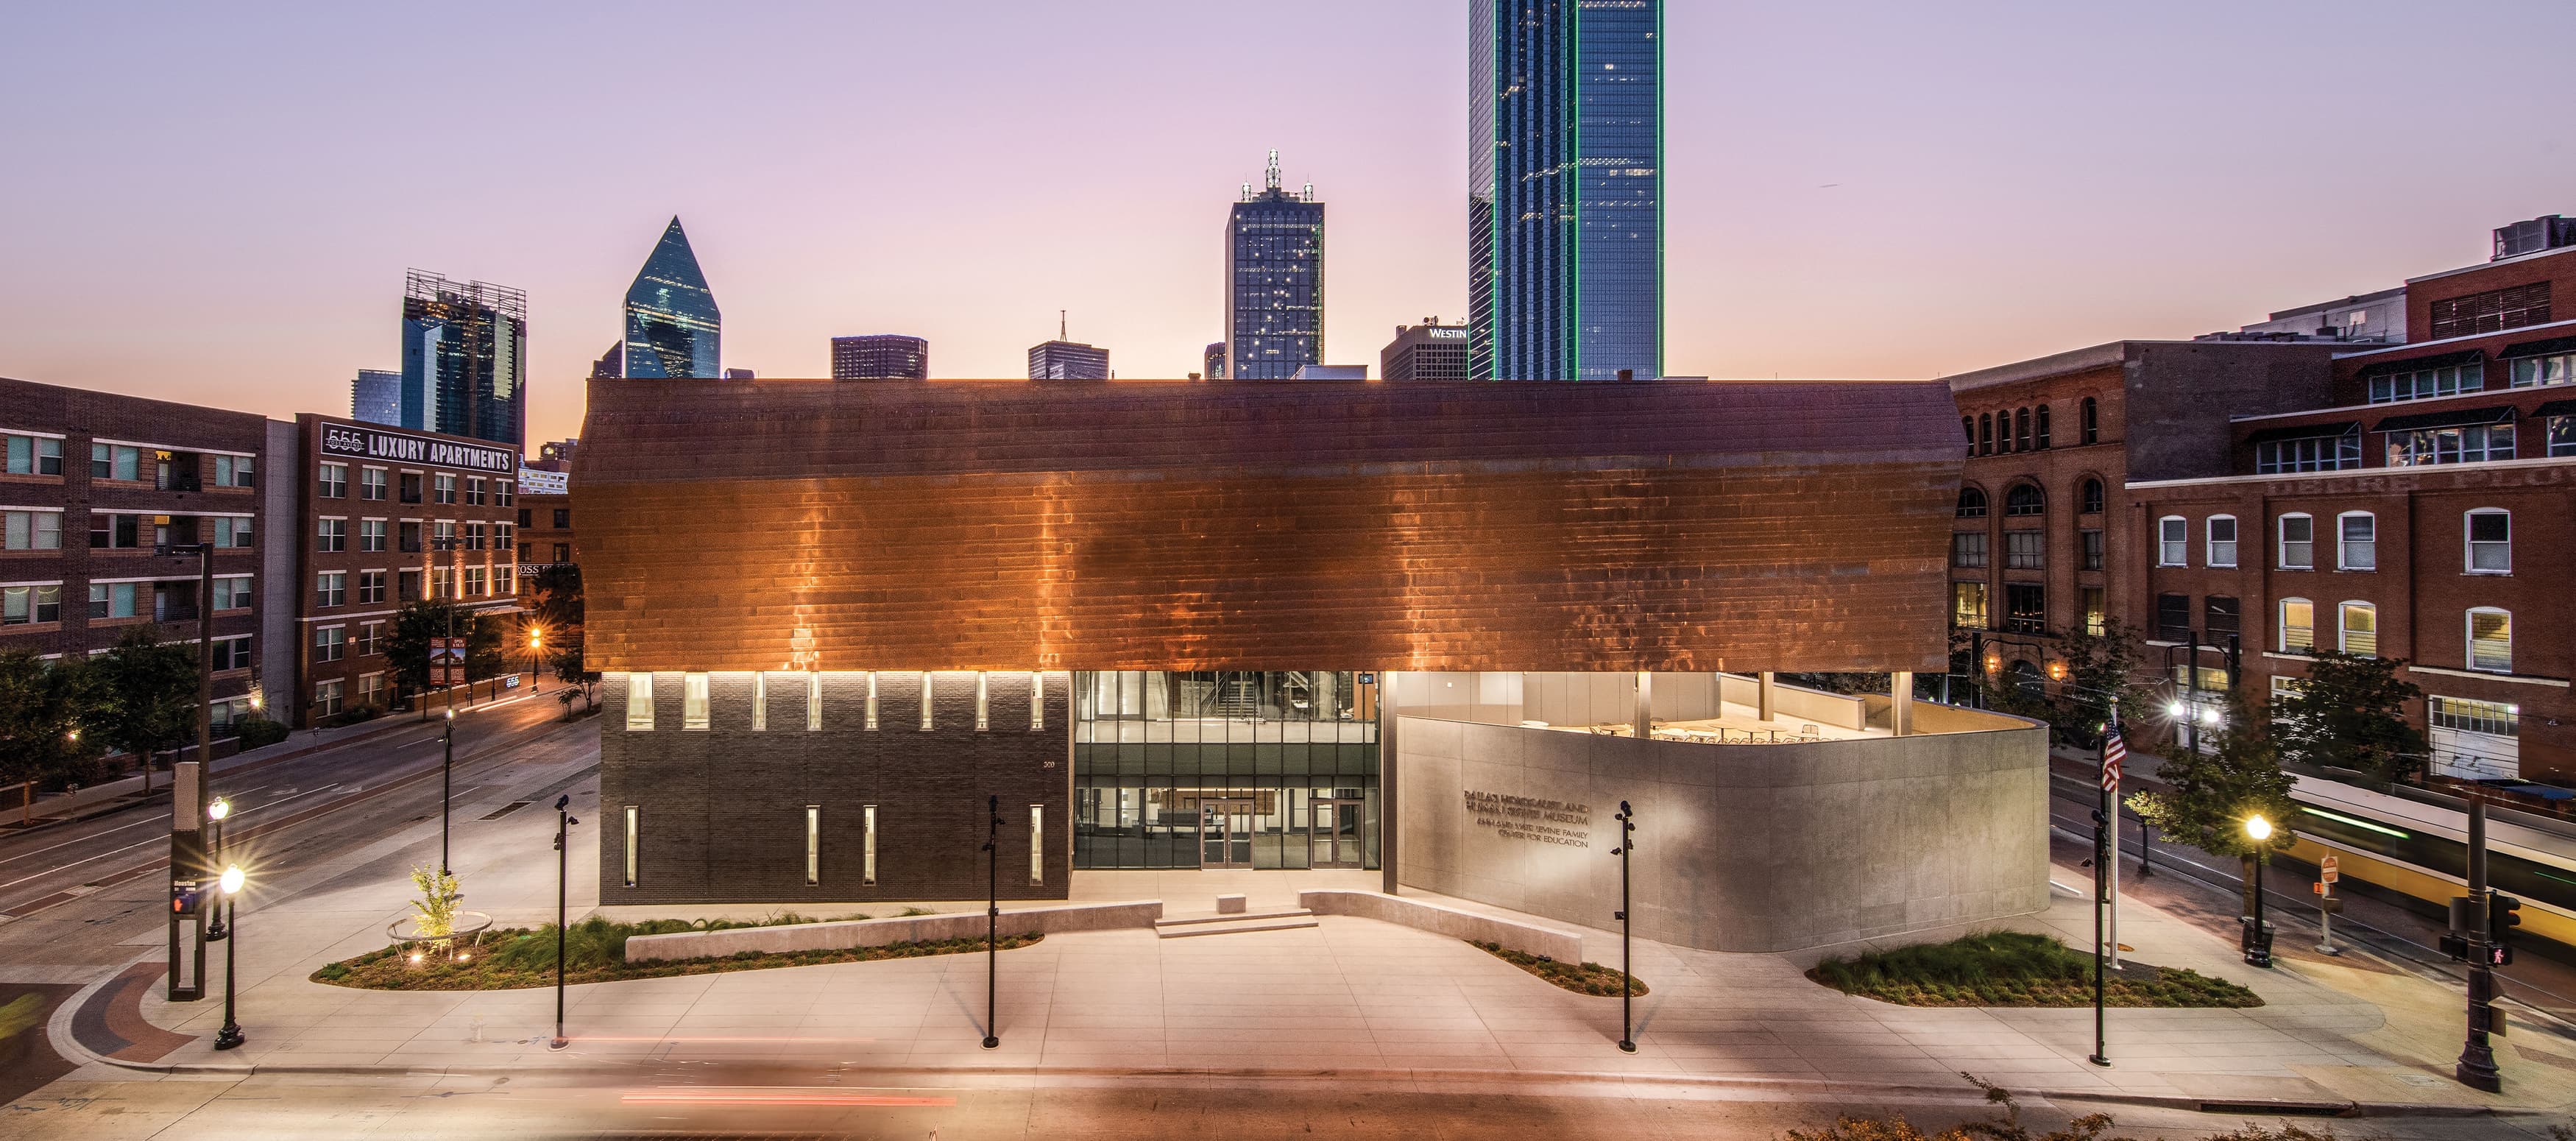 Exterior of Dallas Holocaust Museum Center for Tolerance and Education